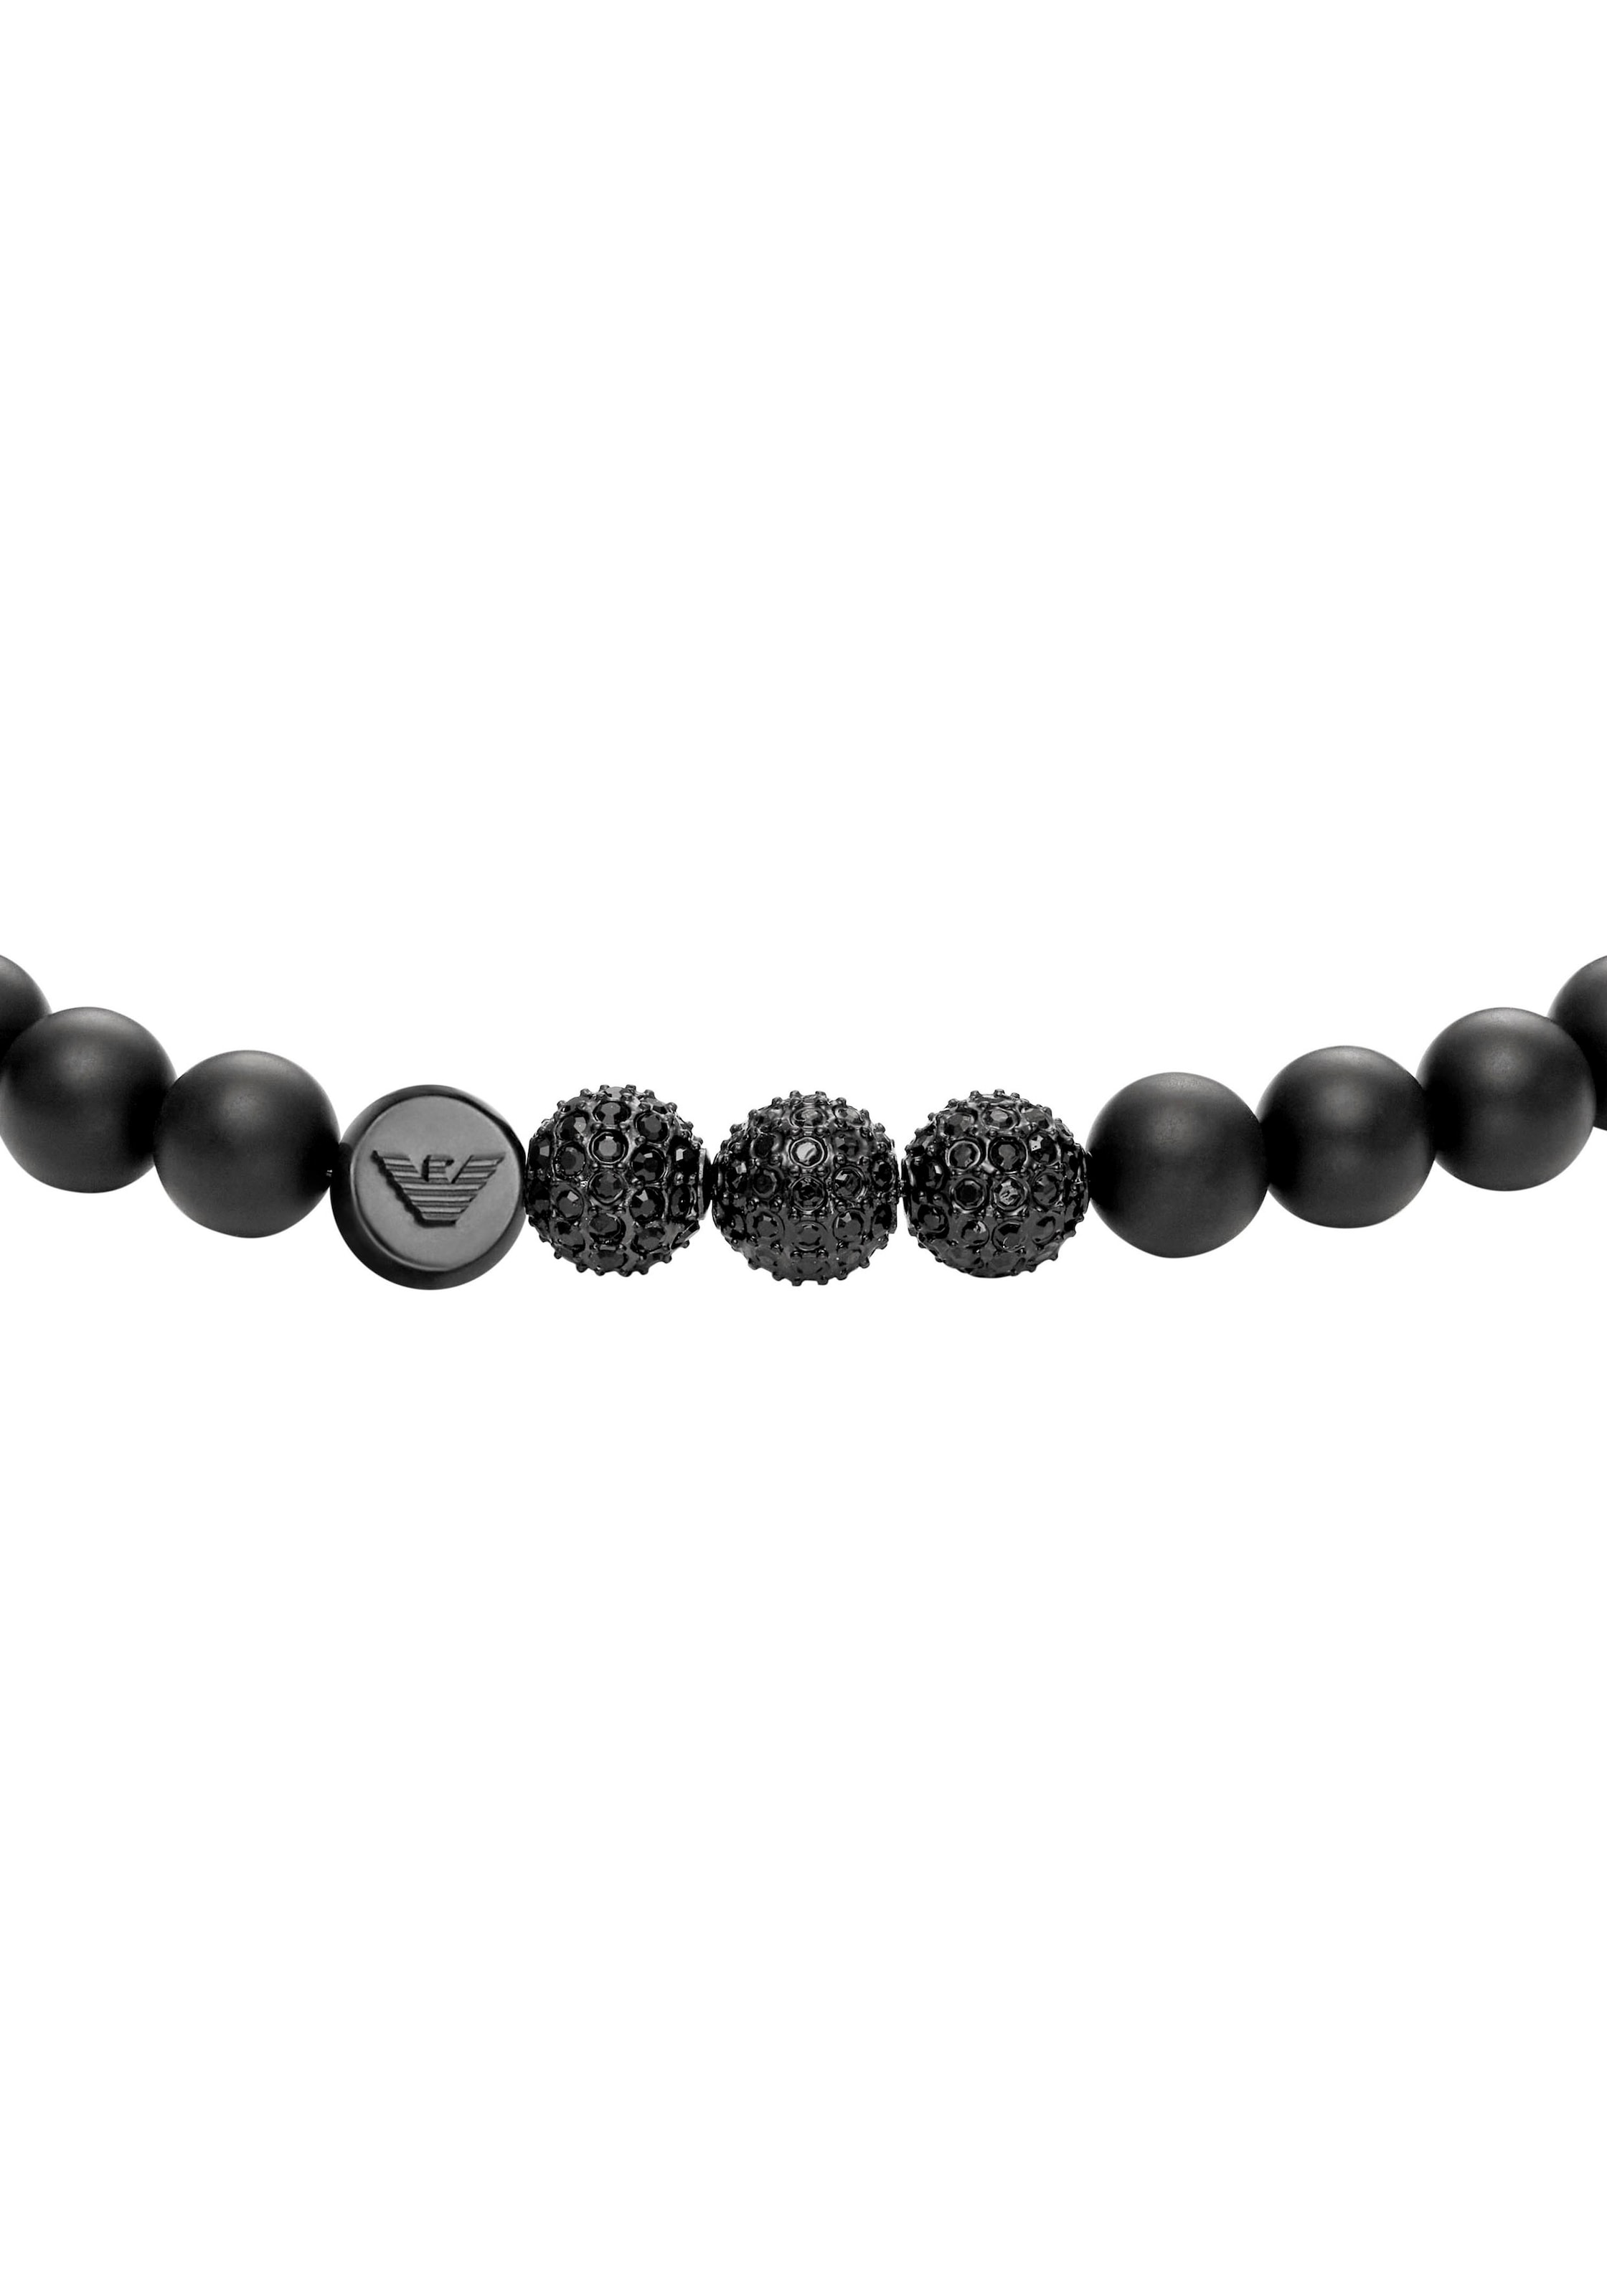 EGS3030001«, BEADS Armband »ICONIC TREND, | Gagat PAVE, Onyx Armani Emporio AND BAUR mit und